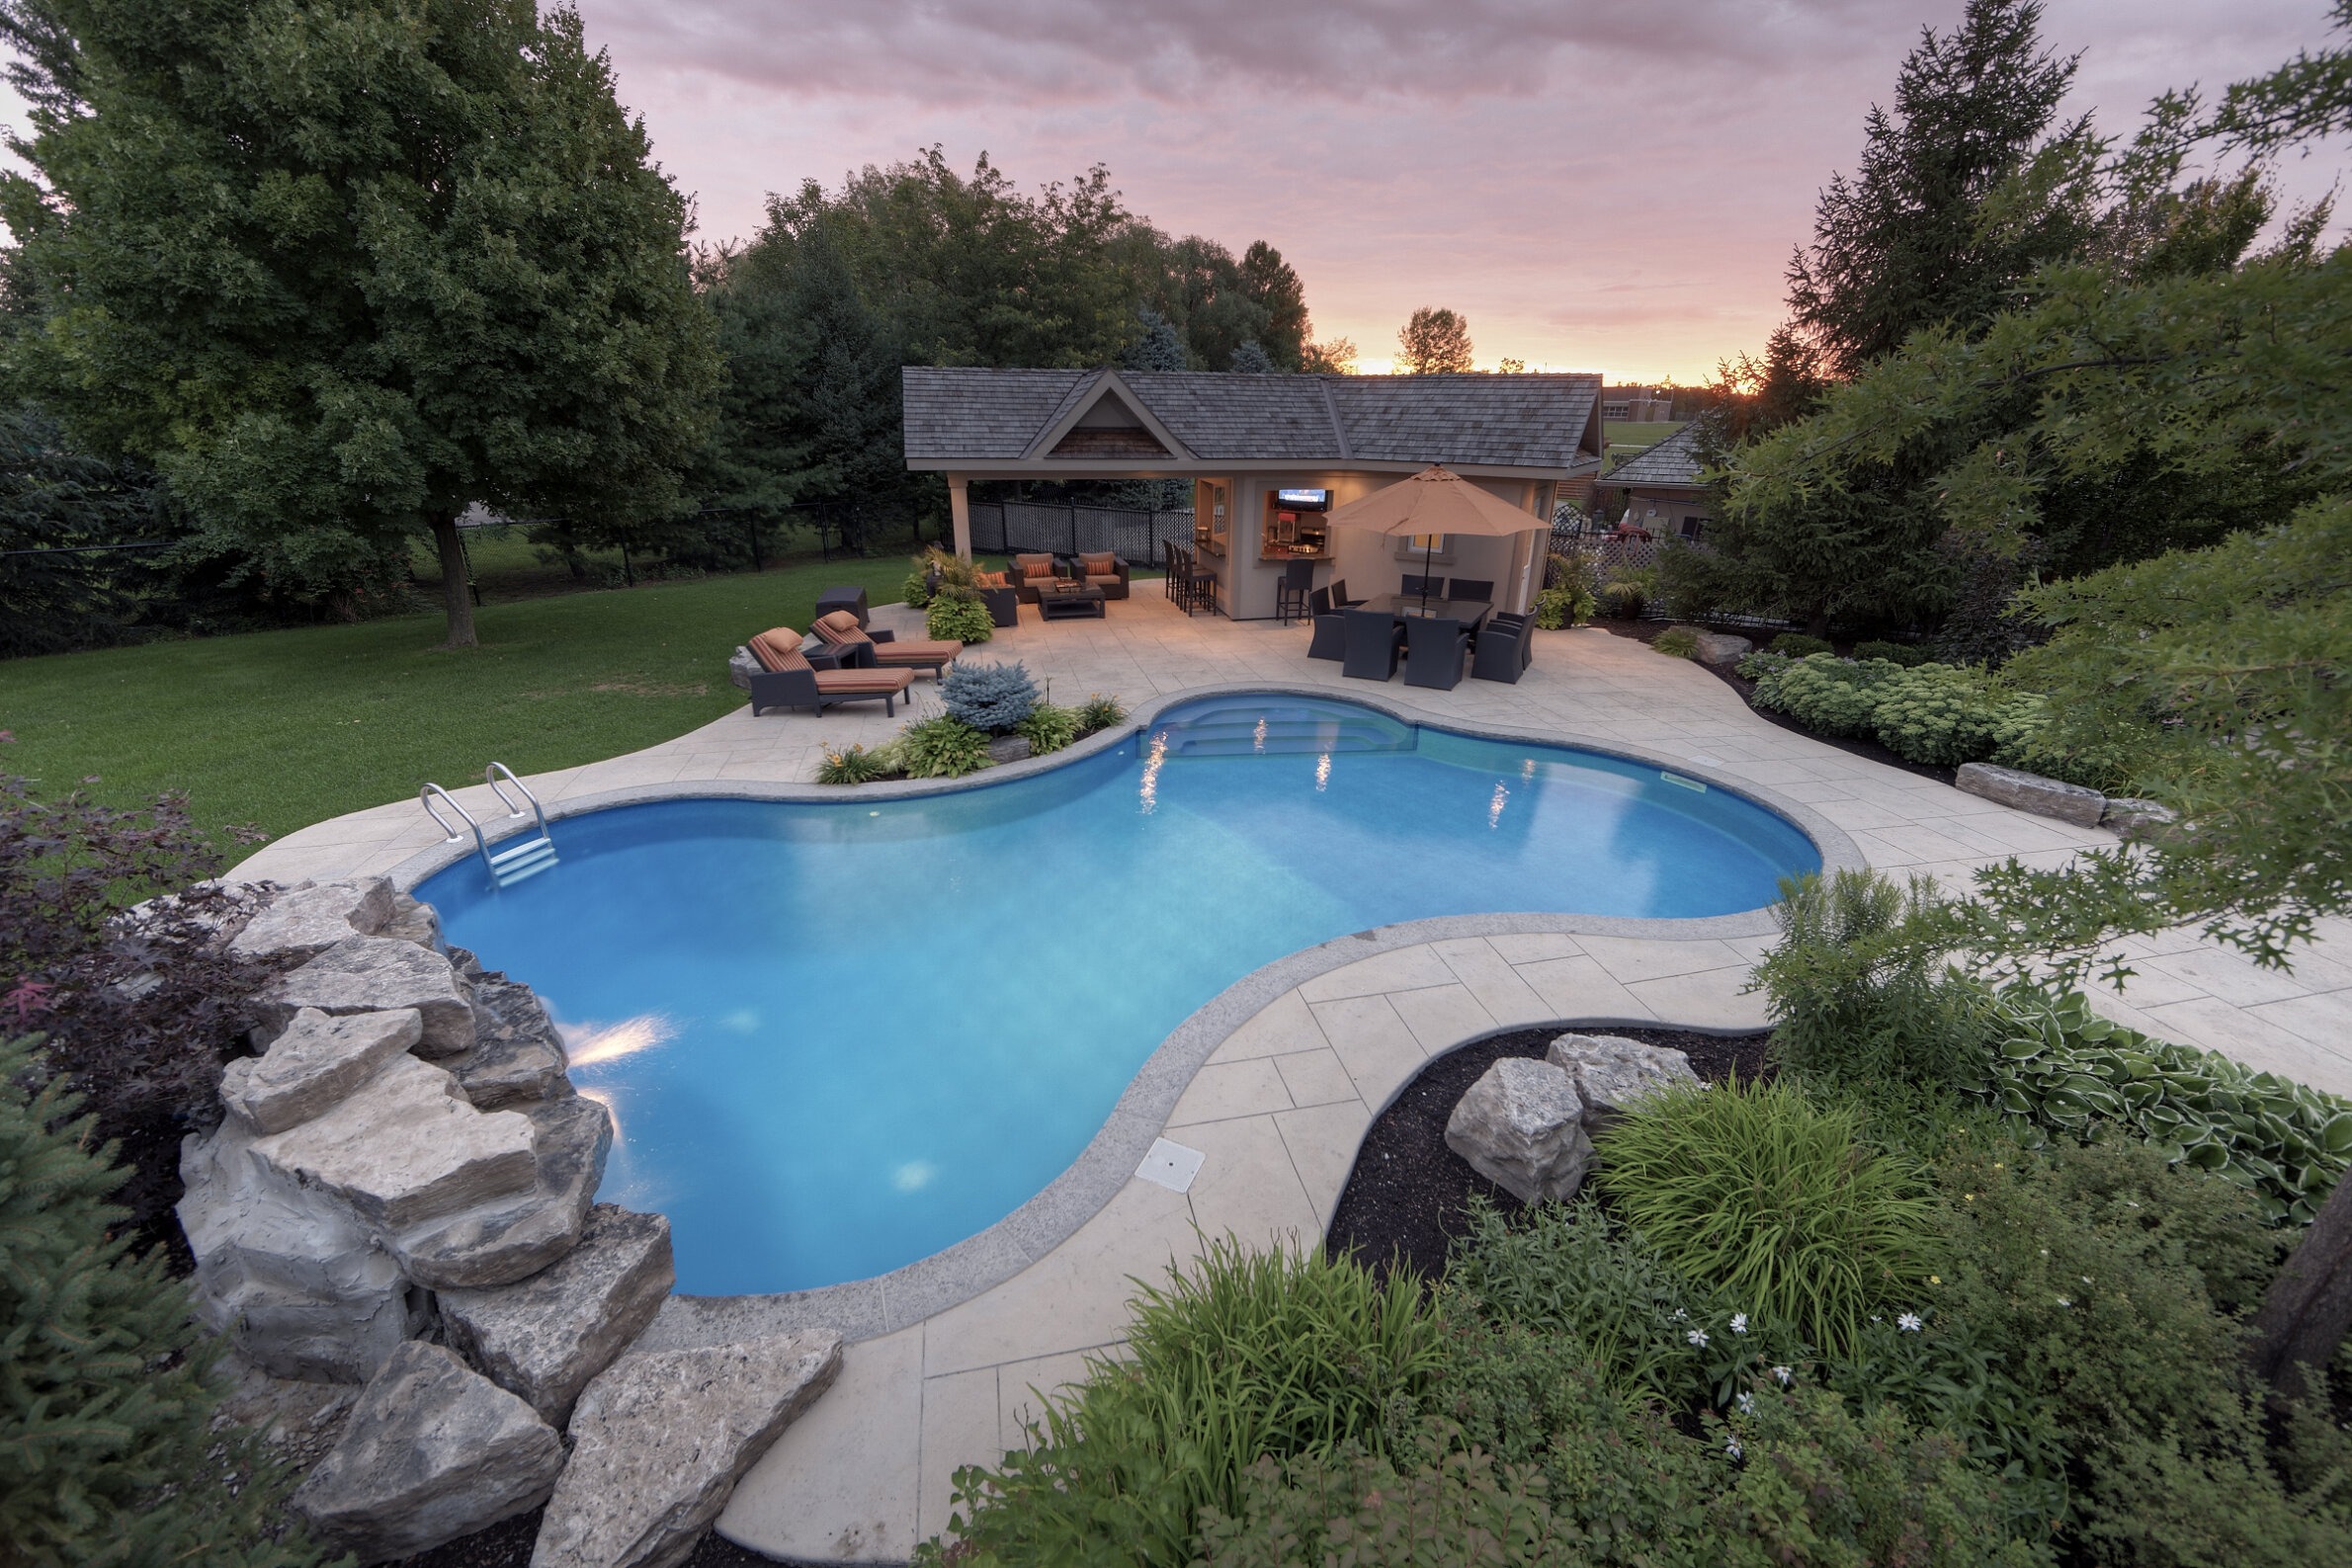 A luxurious backyard with a curved pool at dusk, surrounded by a patio, plush seating, landscaping, and an outdoor kitchen, under a colorful sky.